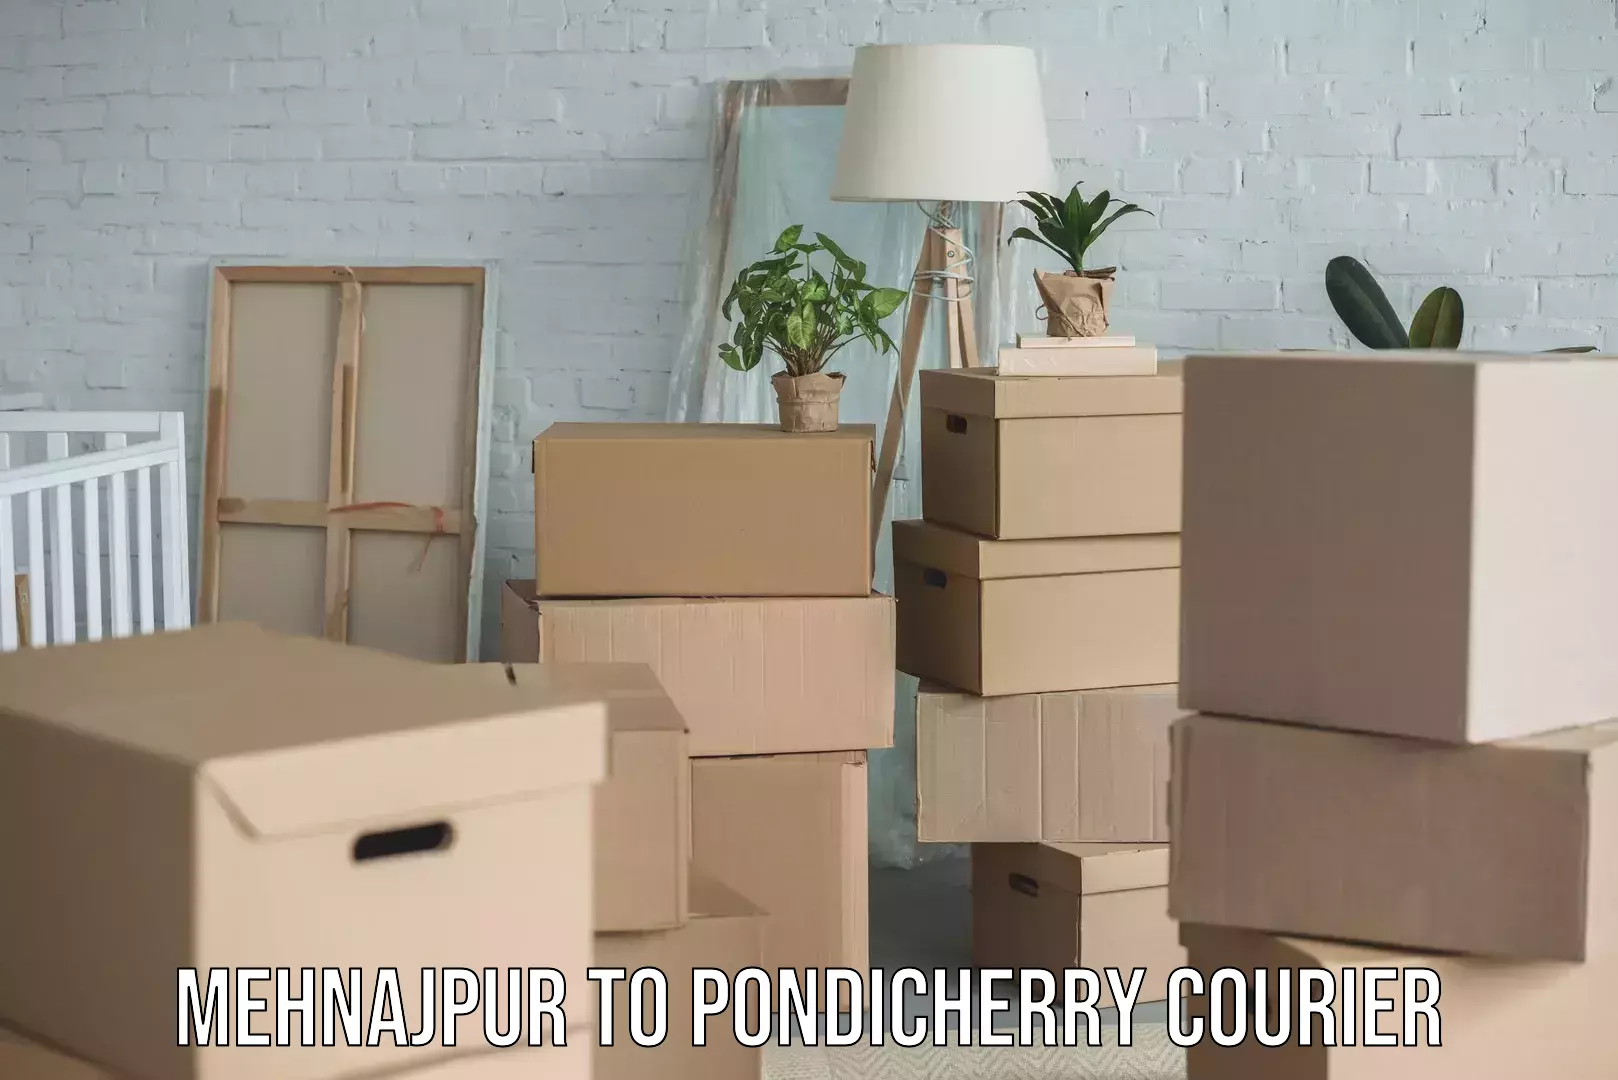 Quality moving and storage Mehnajpur to Pondicherry